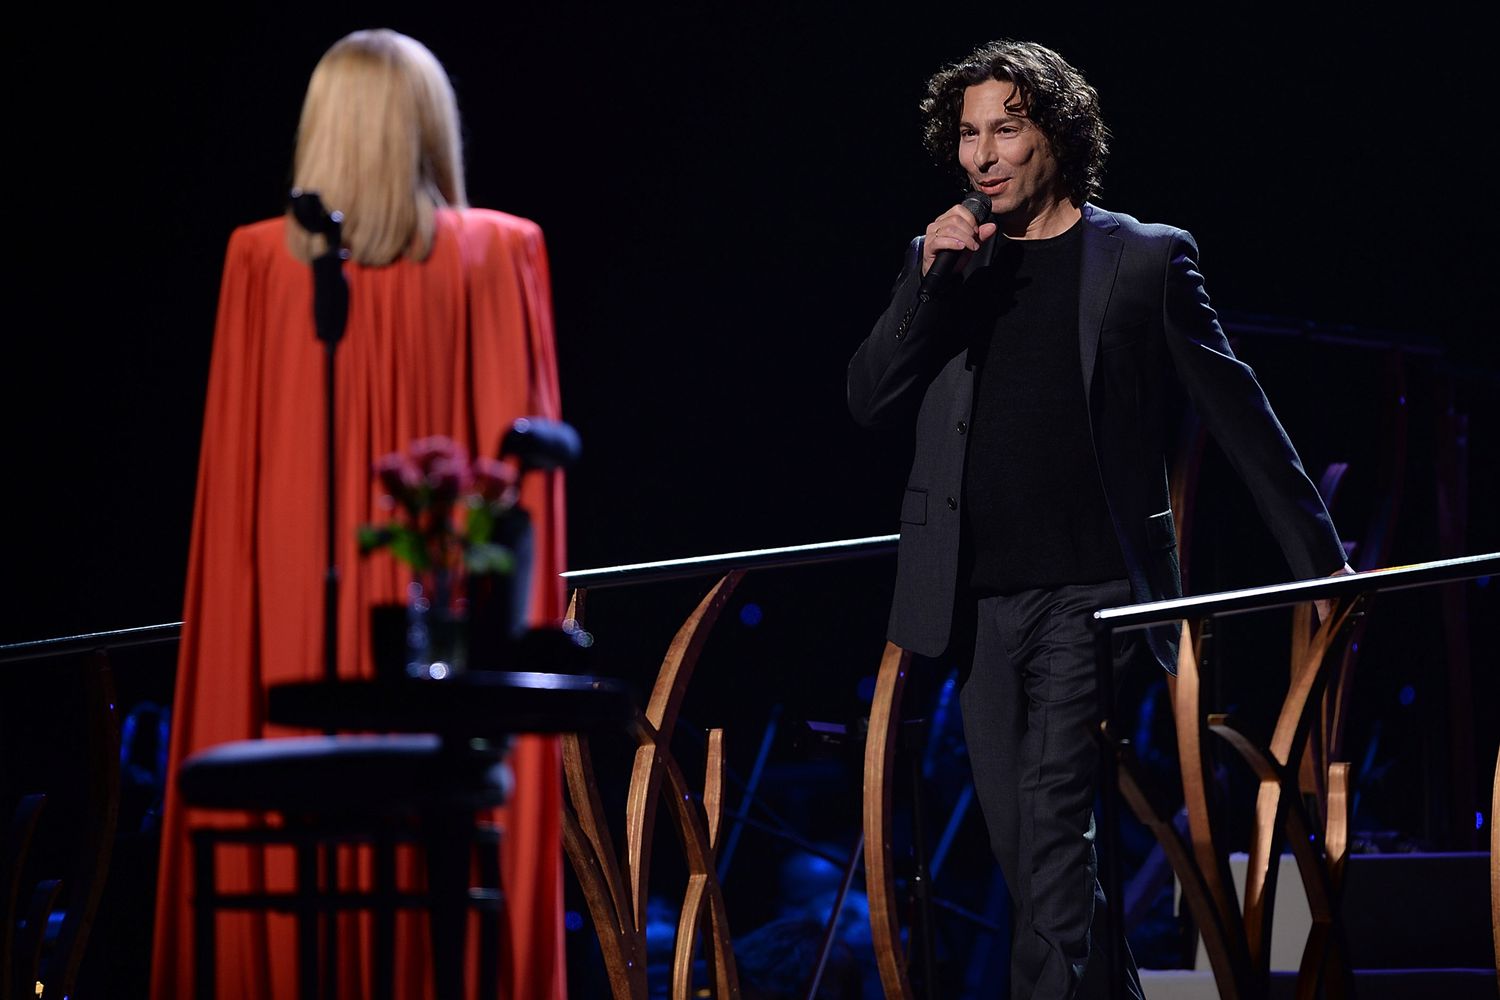 Musician Barbra Streisand performs on stage with her son Jason Gould in concert at O2 Arena on June 1, 2013 in London, England.